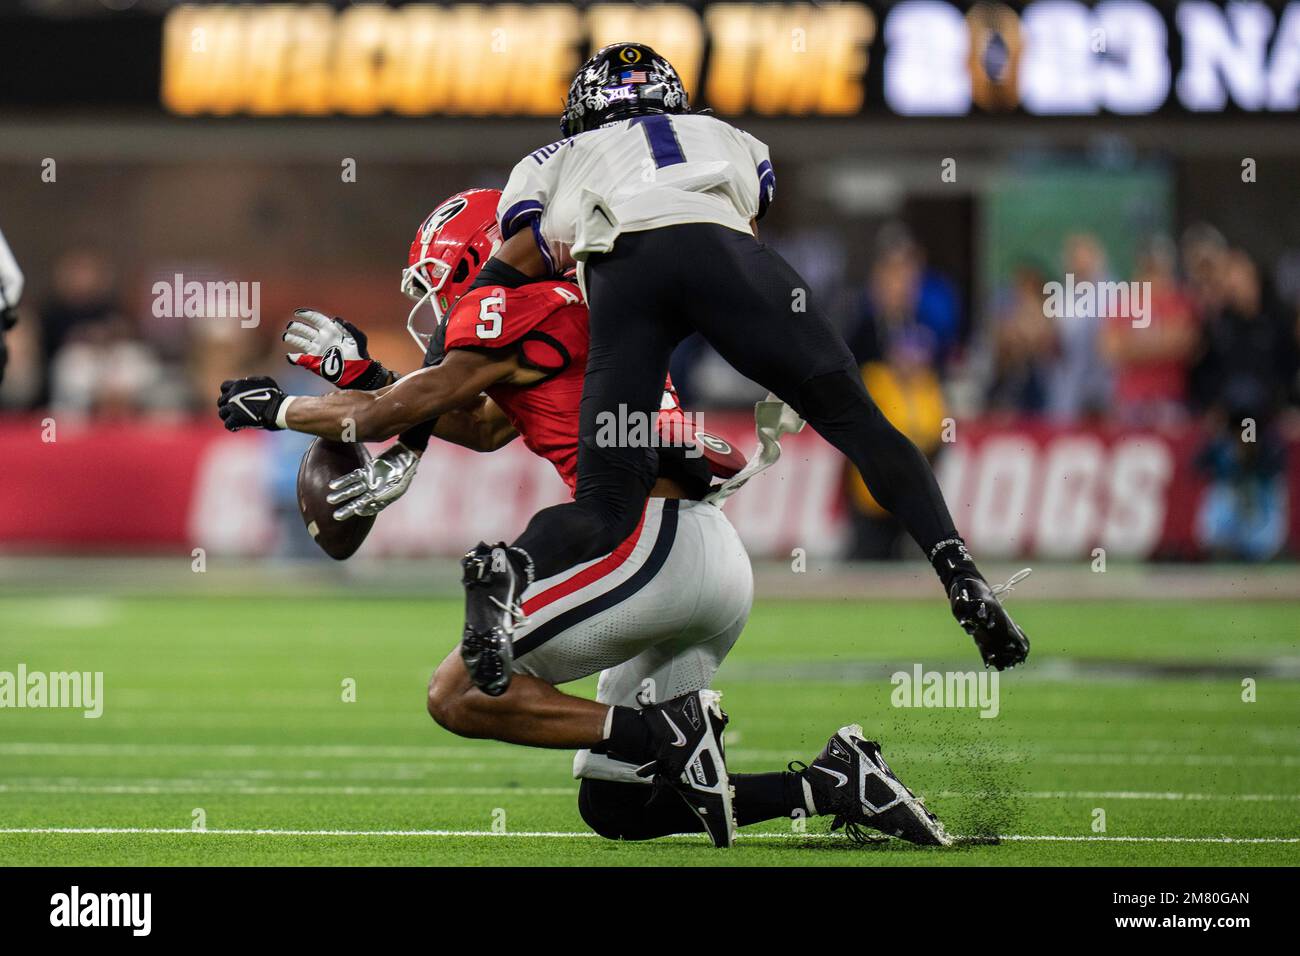 TCU Horned Frogs cornerback Tre'Vius Hodges-Tomlinson (1) is called for pass interference against Georgia Bulldogs wide receiver Adonai Mitchell (5) d Stock Photo